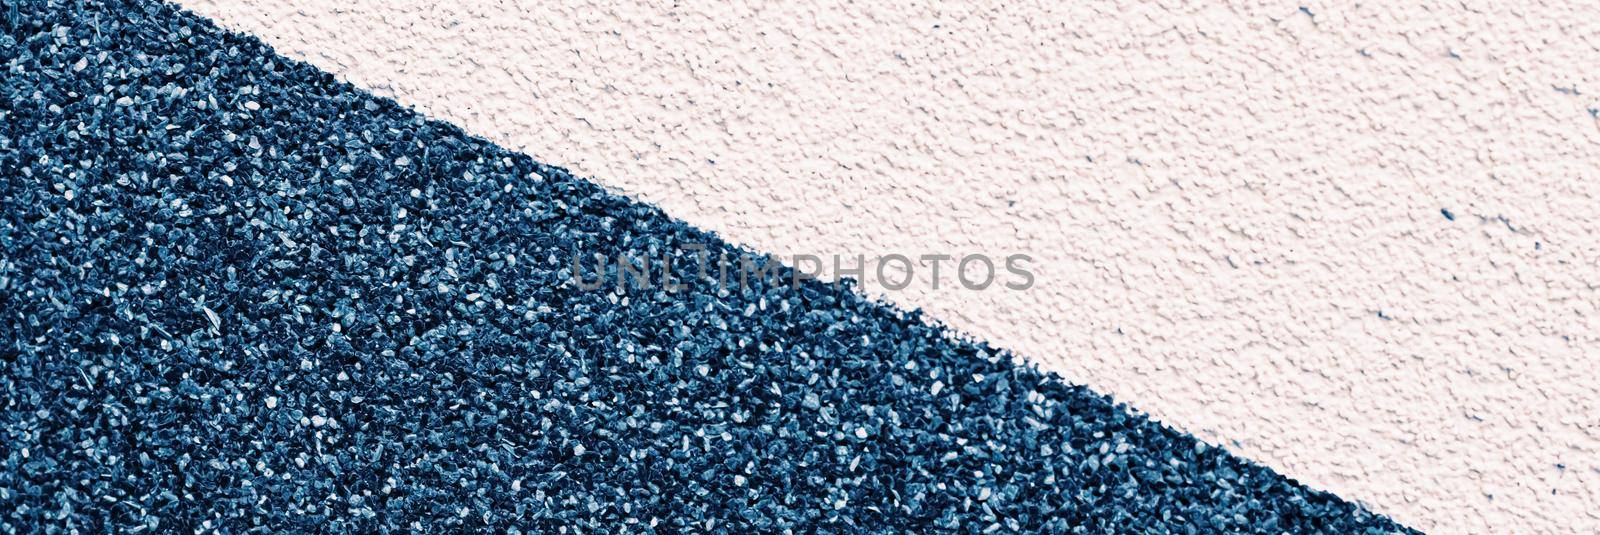 Duotone stucco wall texture as grunge background and urban detail closeup